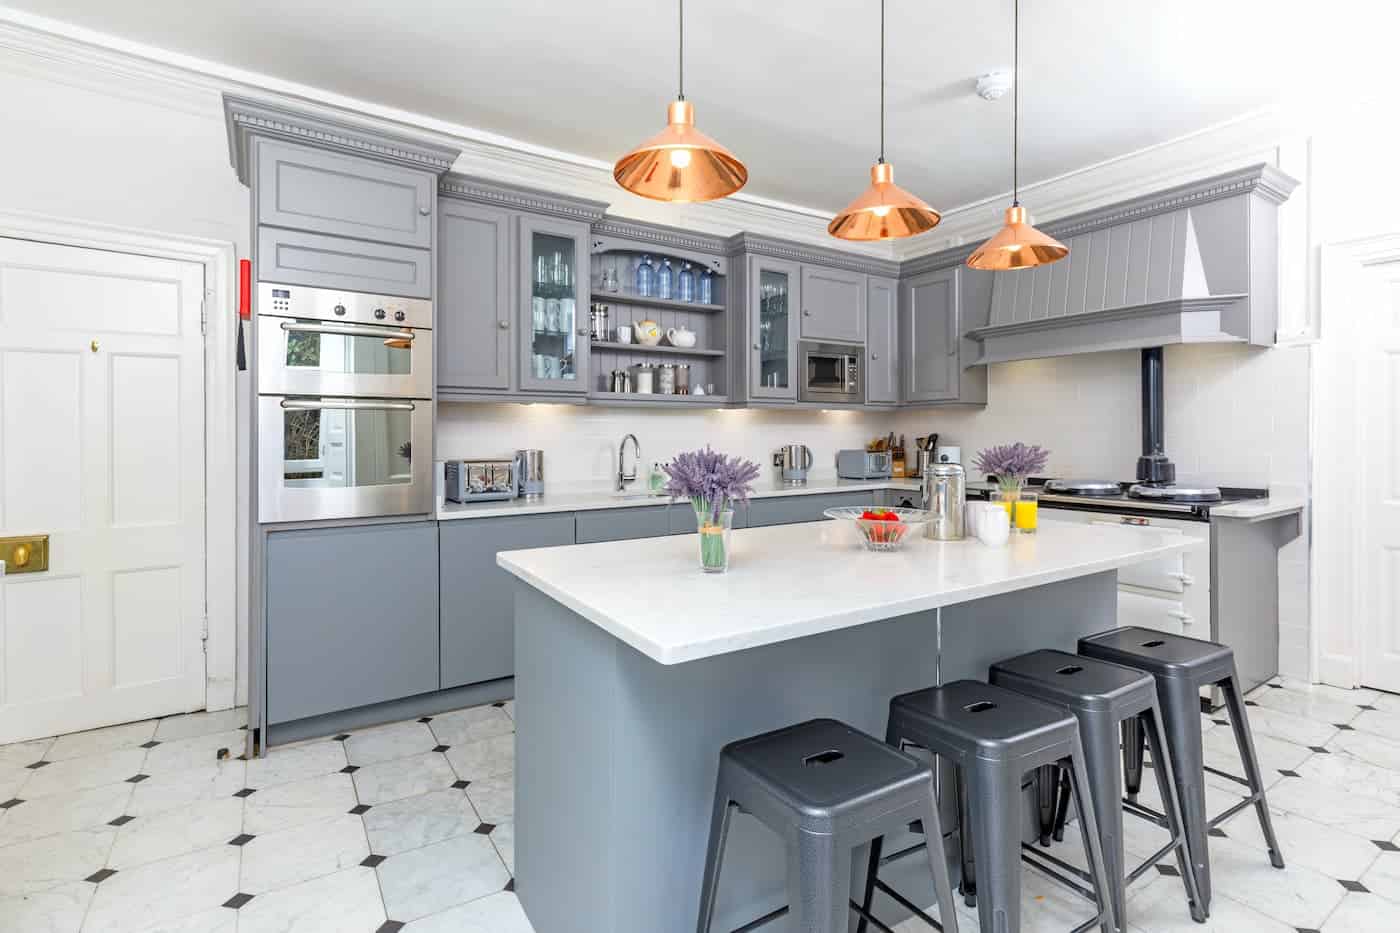 New Kitchen Island Shoot Locations in London - The Location Guys